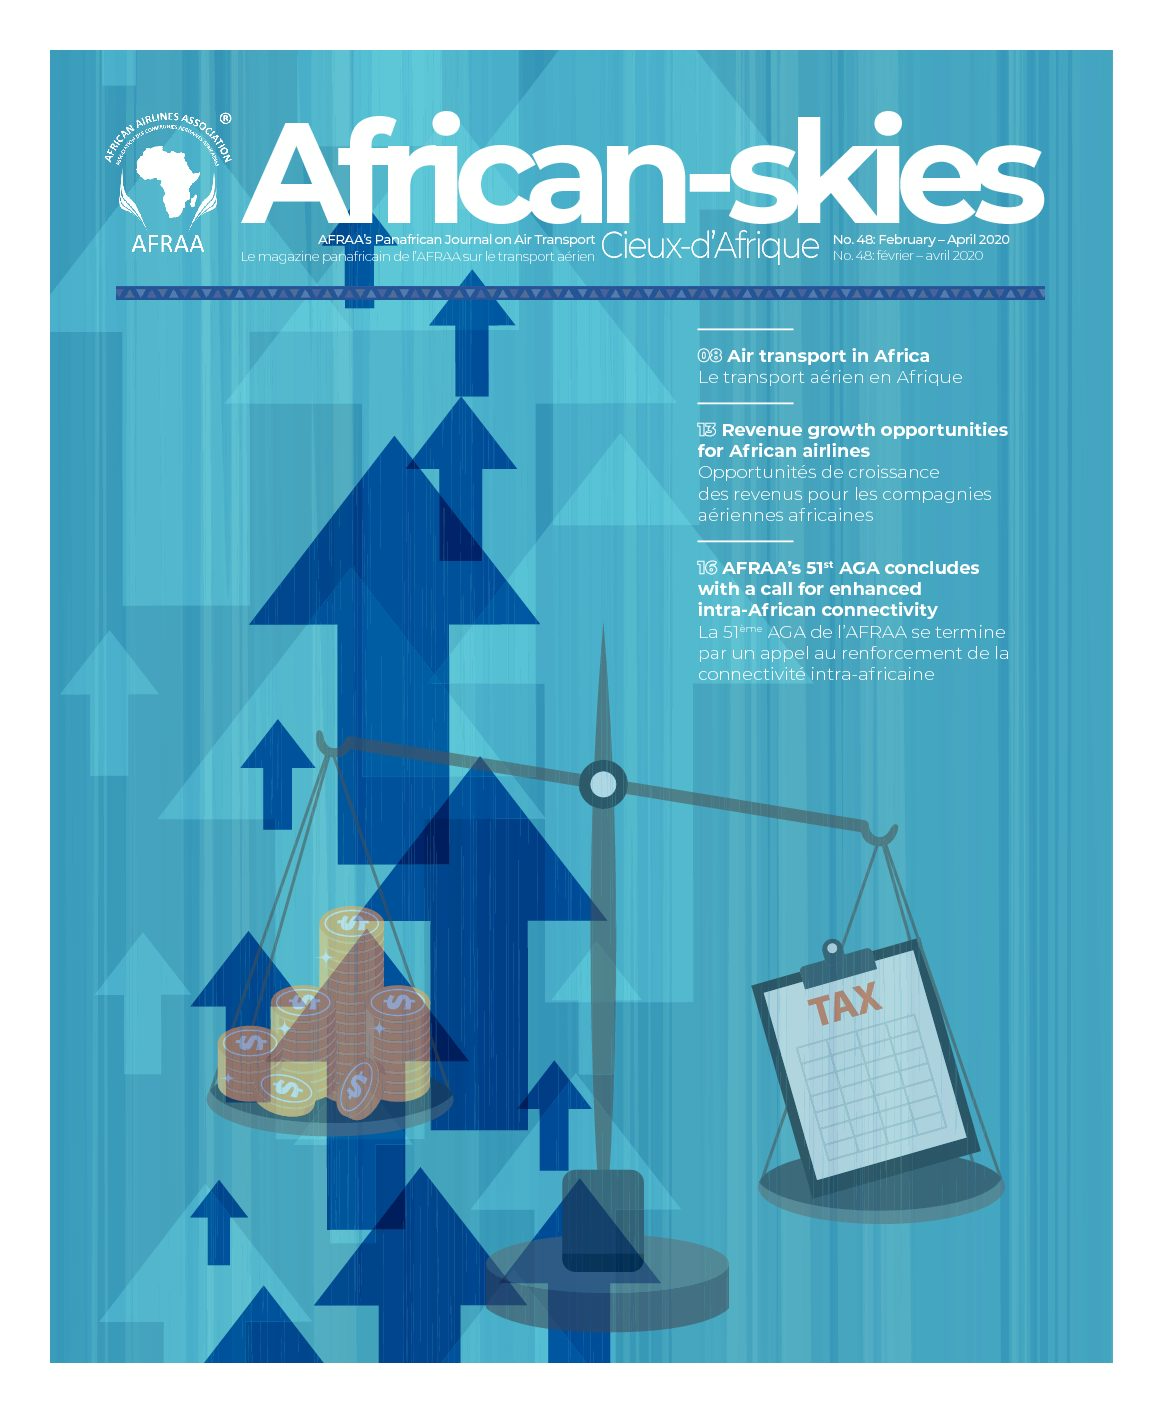 African Skies Issue no. 48